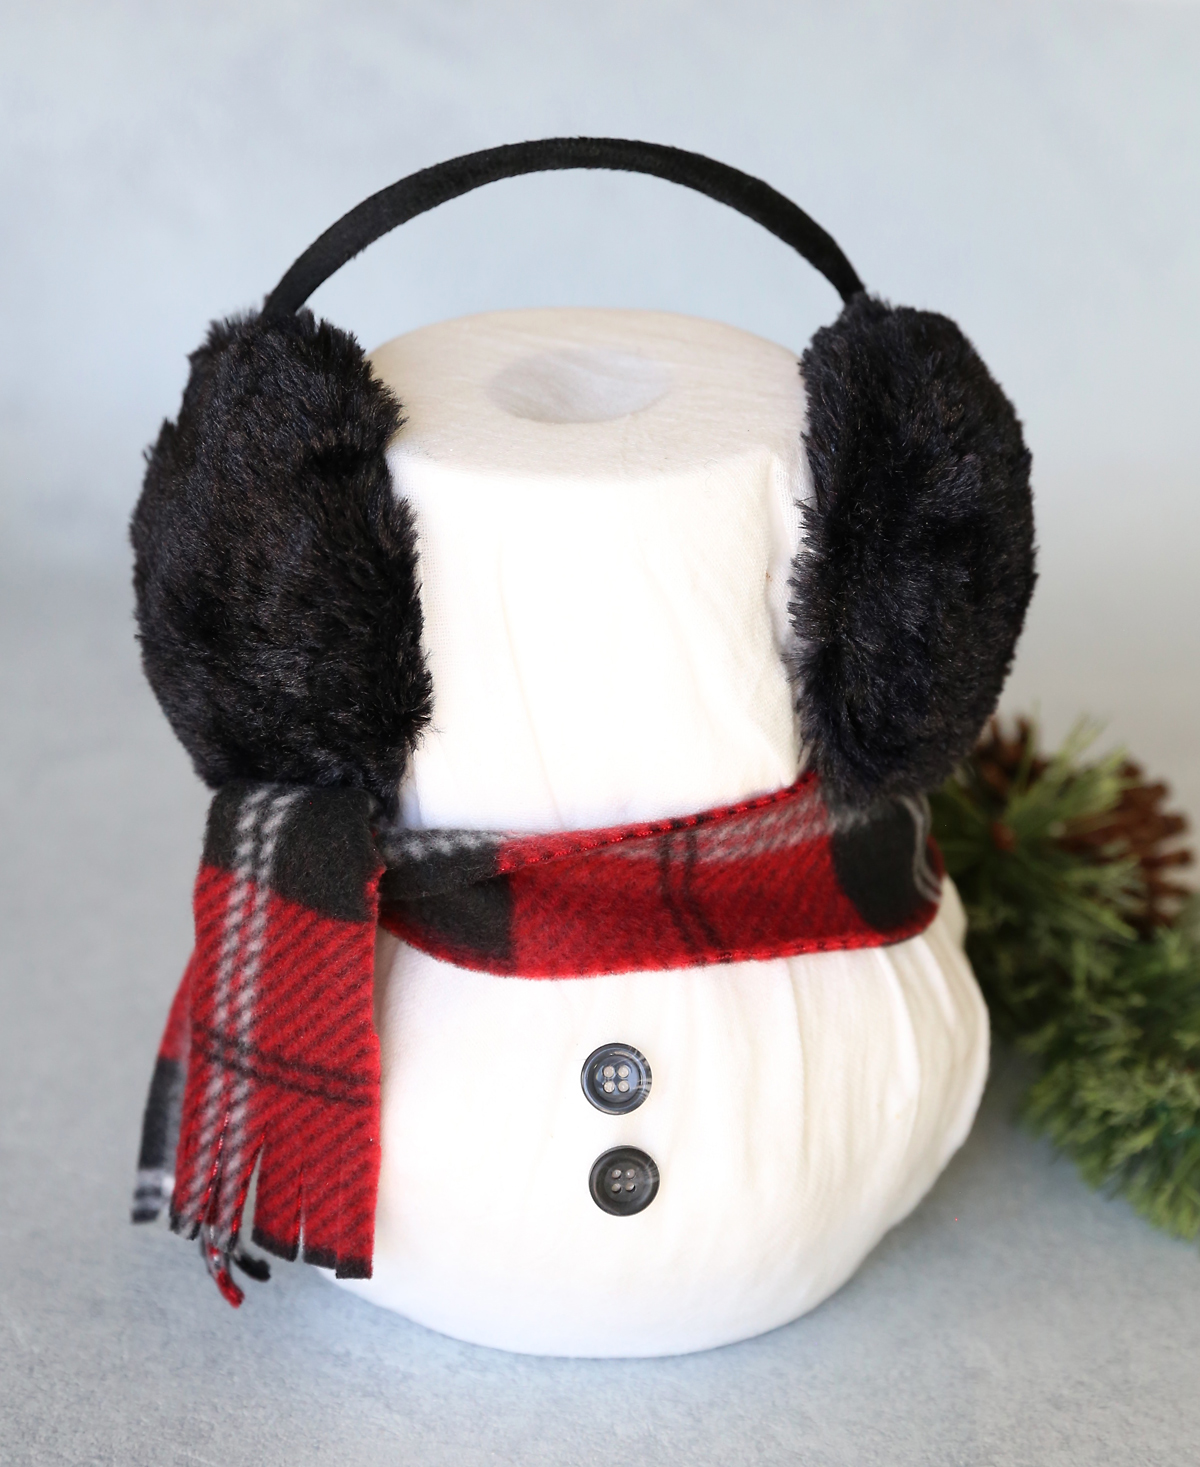 Snowman made from two rolls of toilet paper with fleece scarf and earmuffs